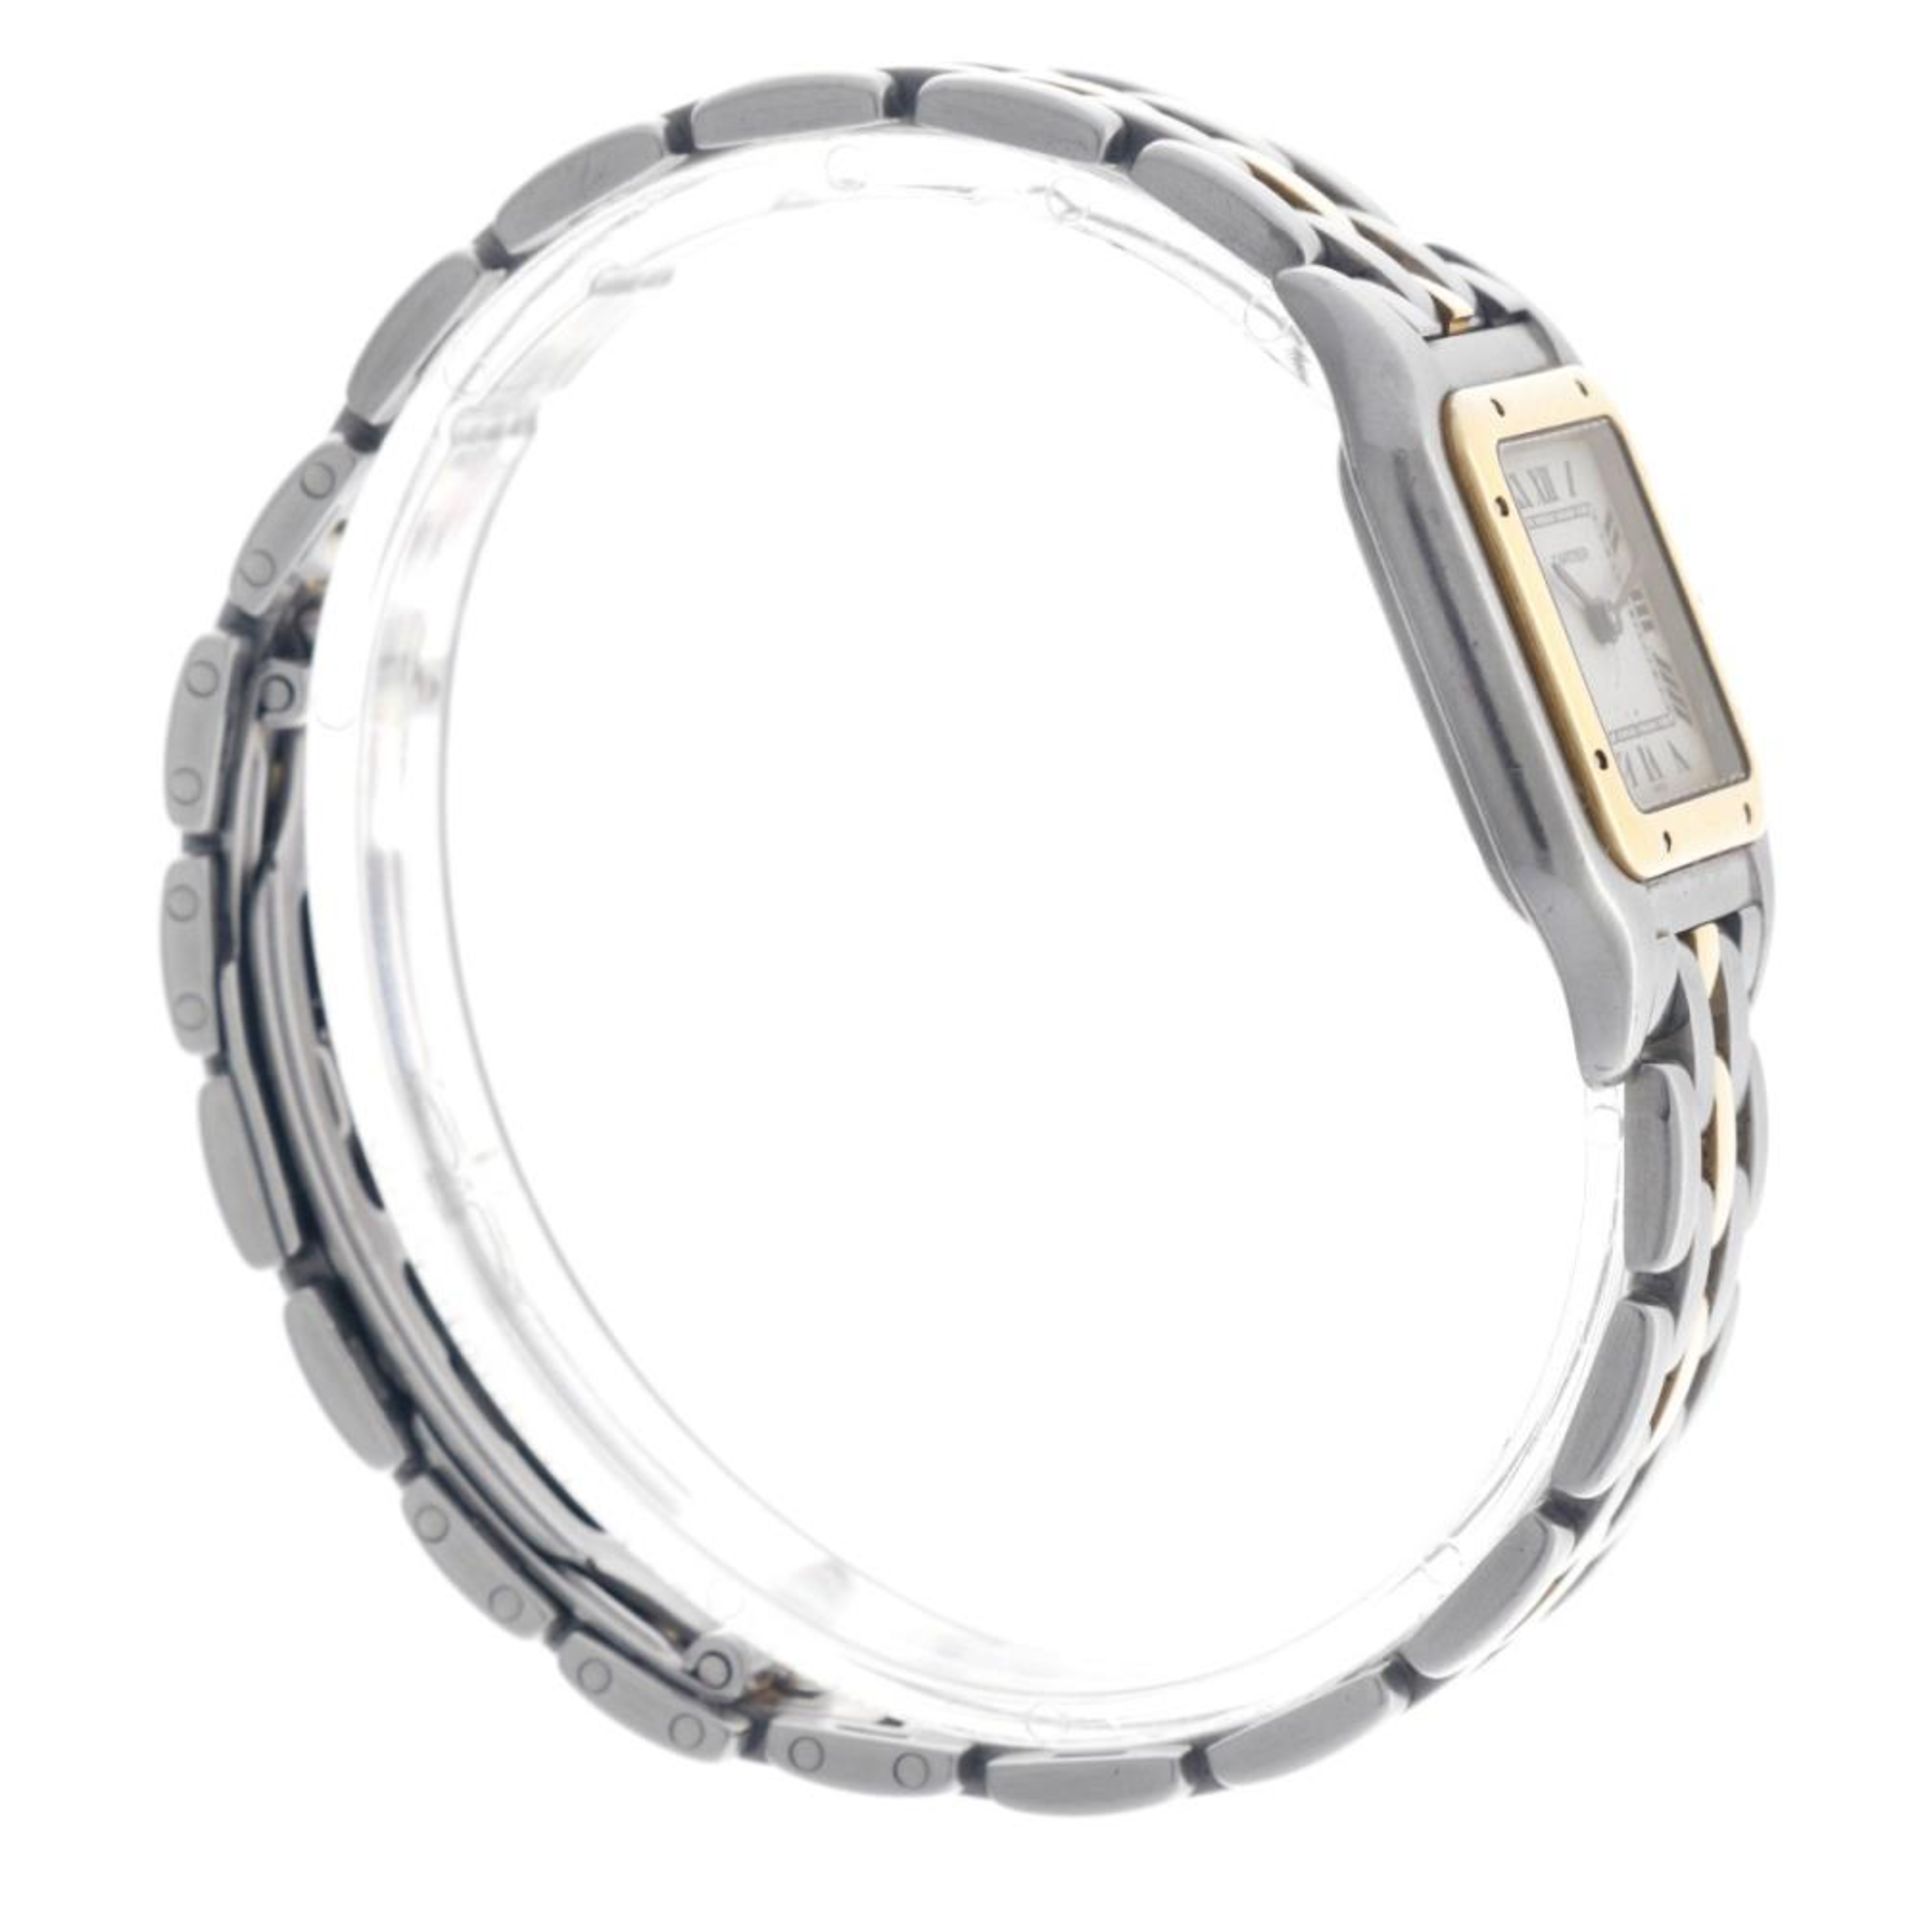 Cartier Panthere 166921 - Ladies watch - approx. 1989. - Image 7 of 12